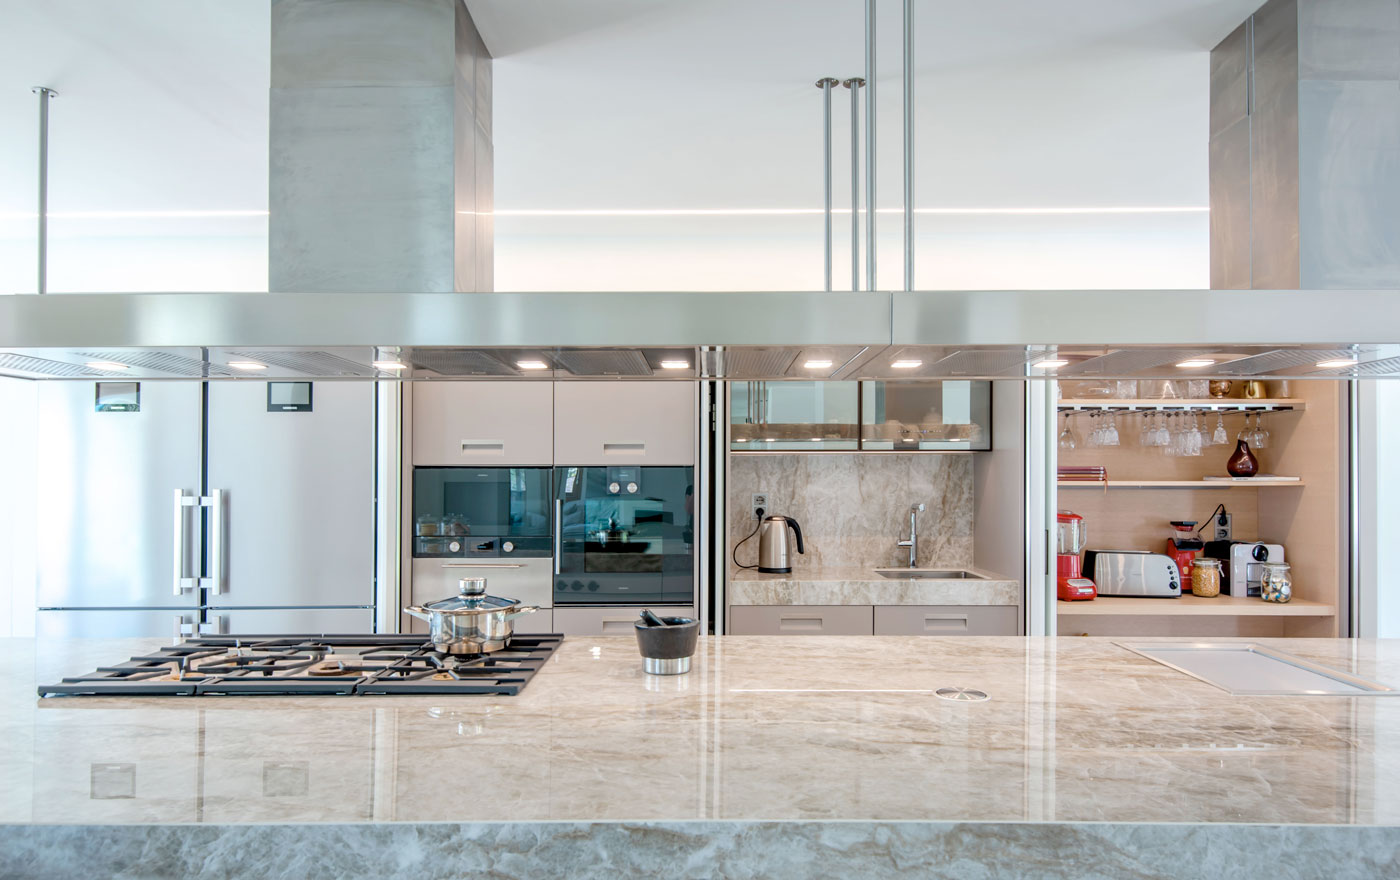 Kitchen refurbished by Overlord by Sergi Quílez i Marin